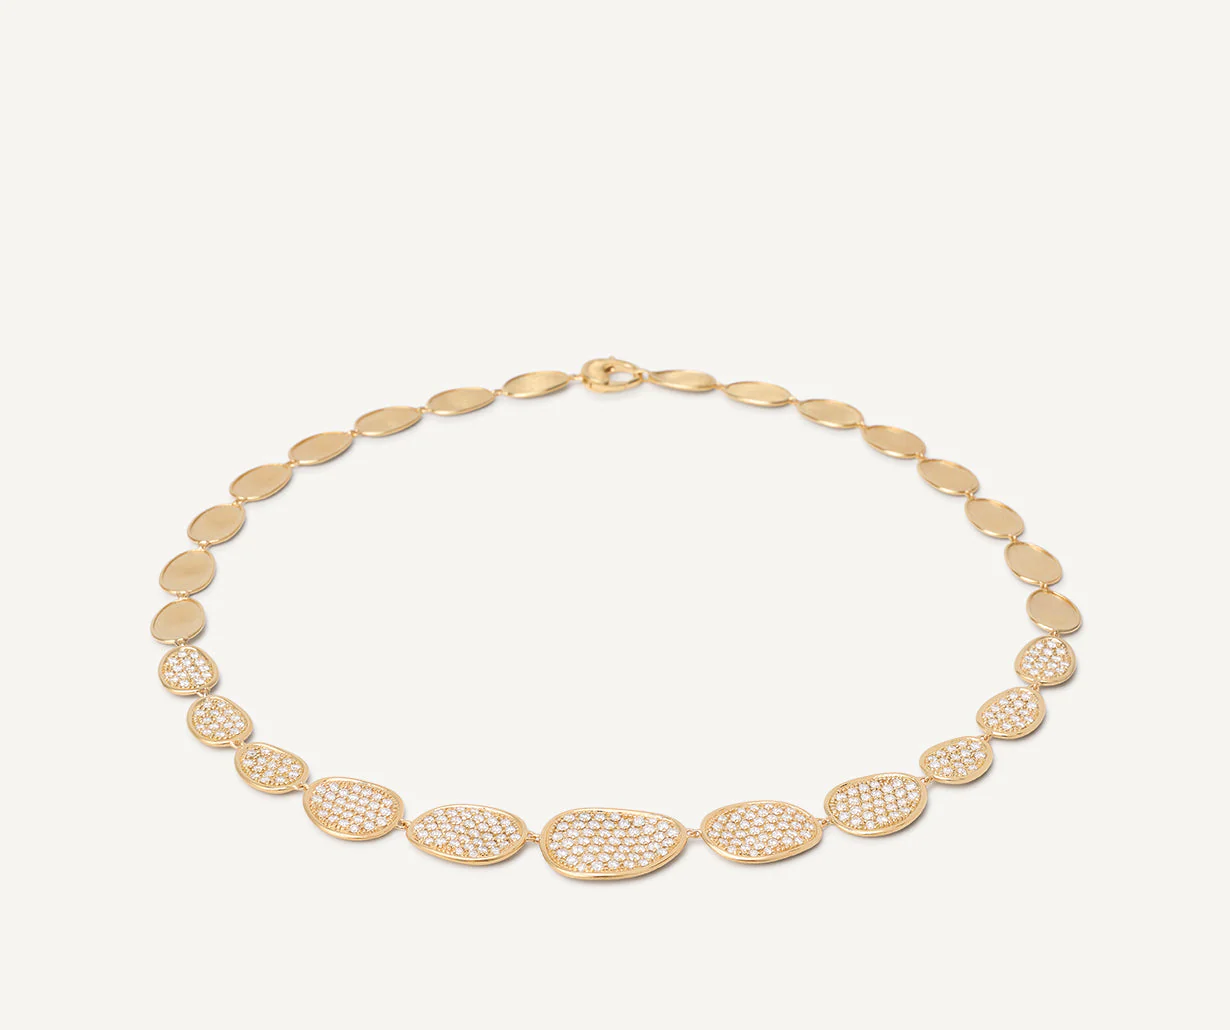 Lunaria necklace in 18k yellow gold with diamonds worn on model